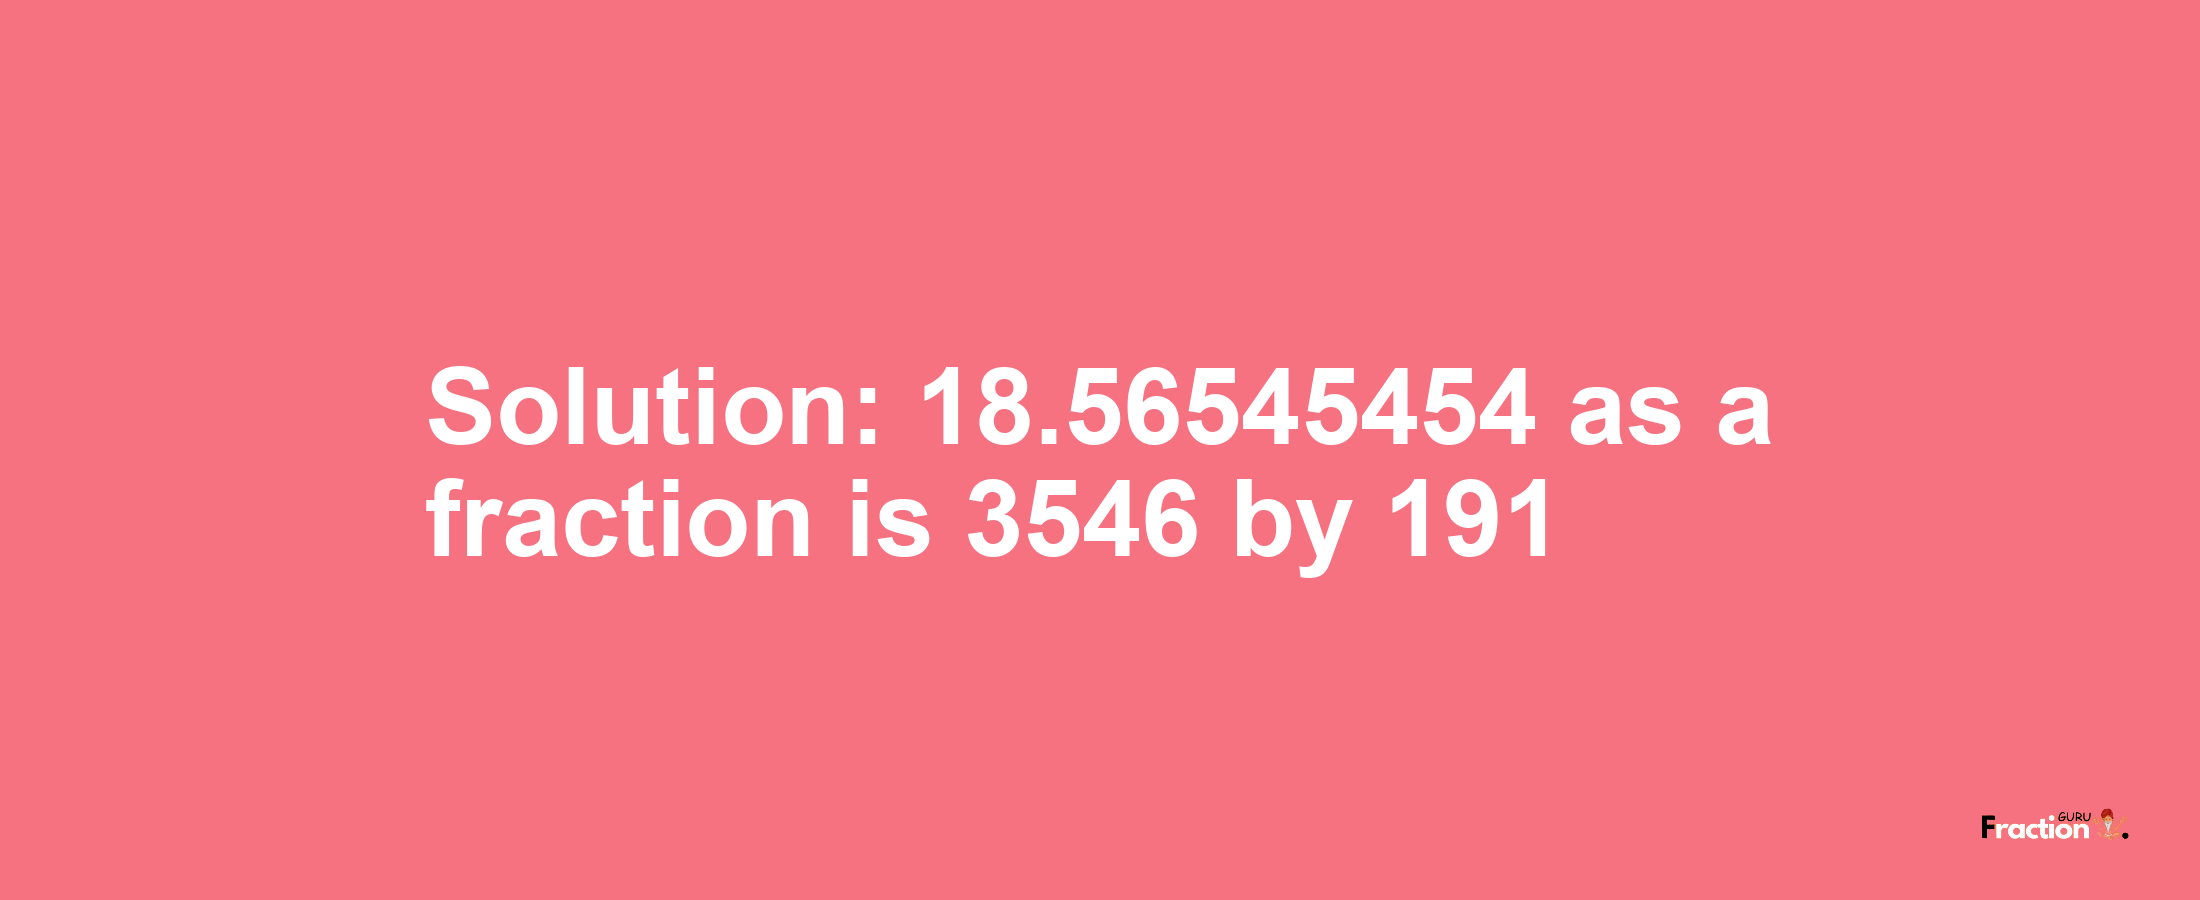 Solution:18.56545454 as a fraction is 3546/191